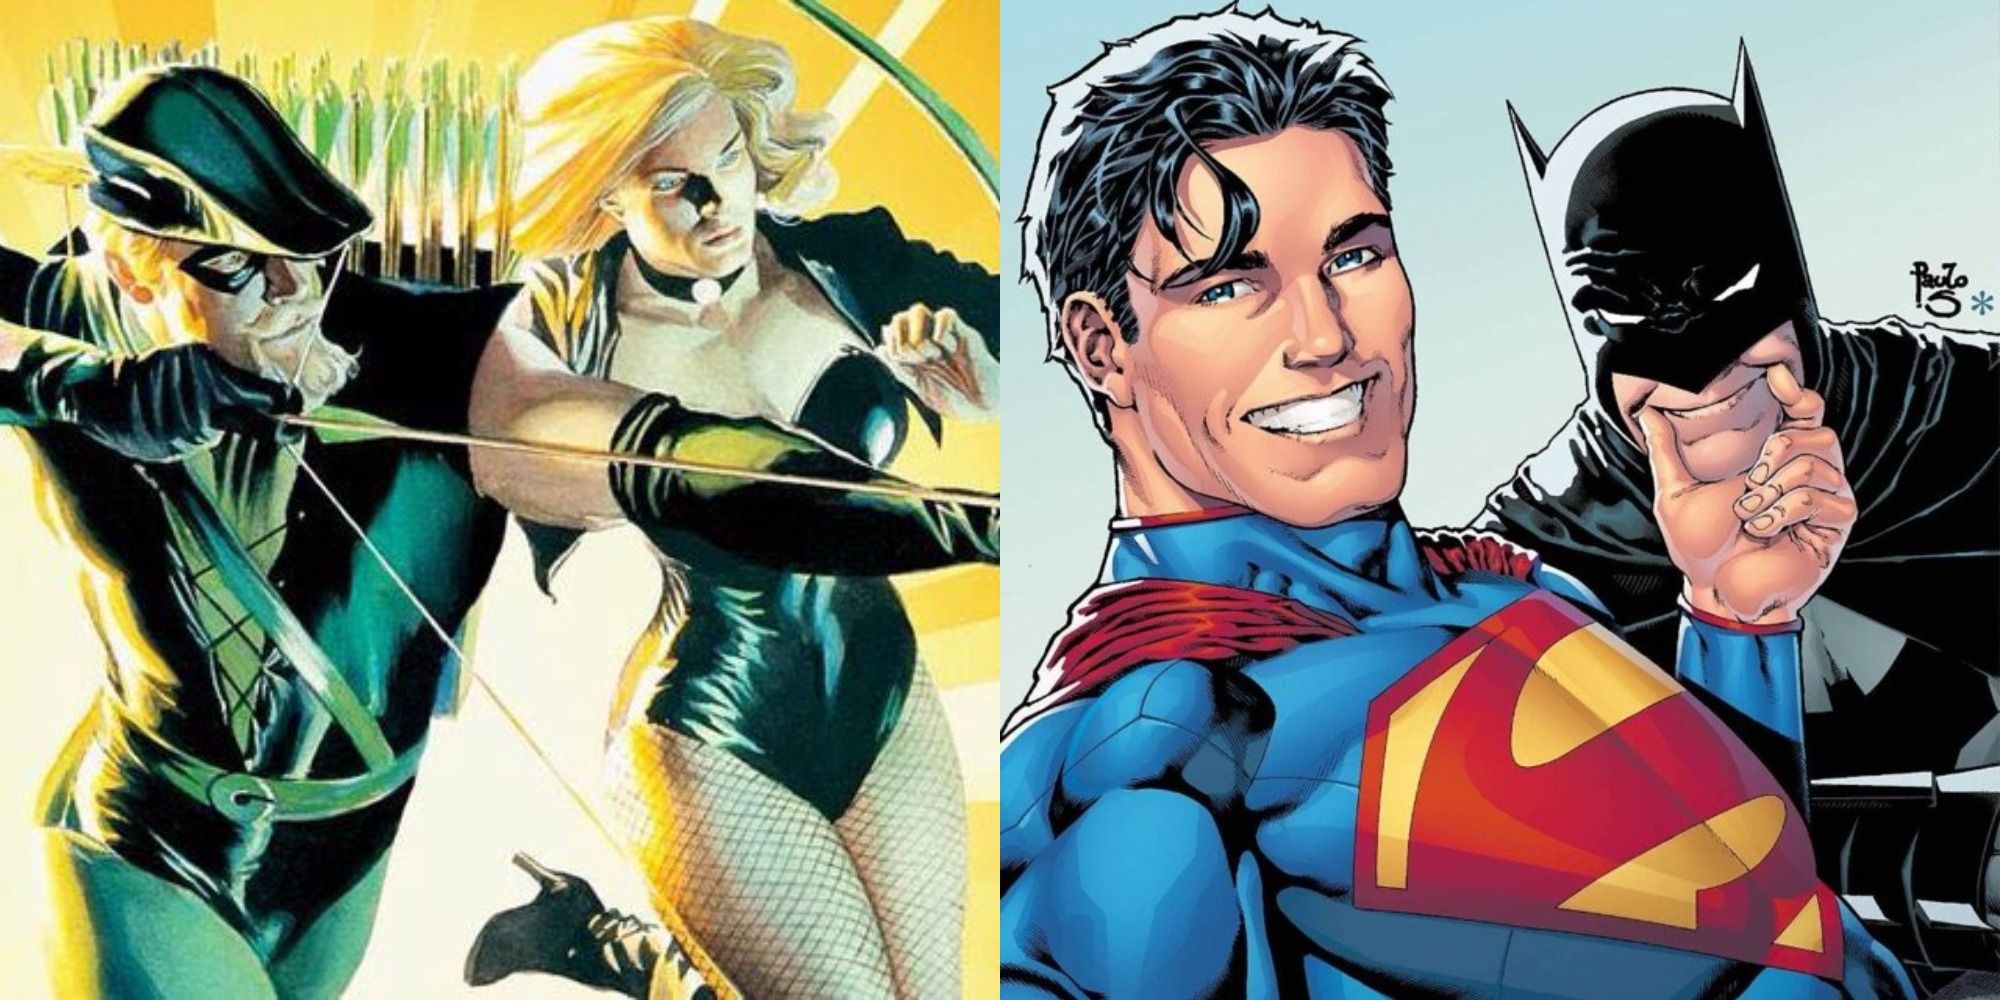 Split image of Green Arrow with Black Canary, and Superman with Batman